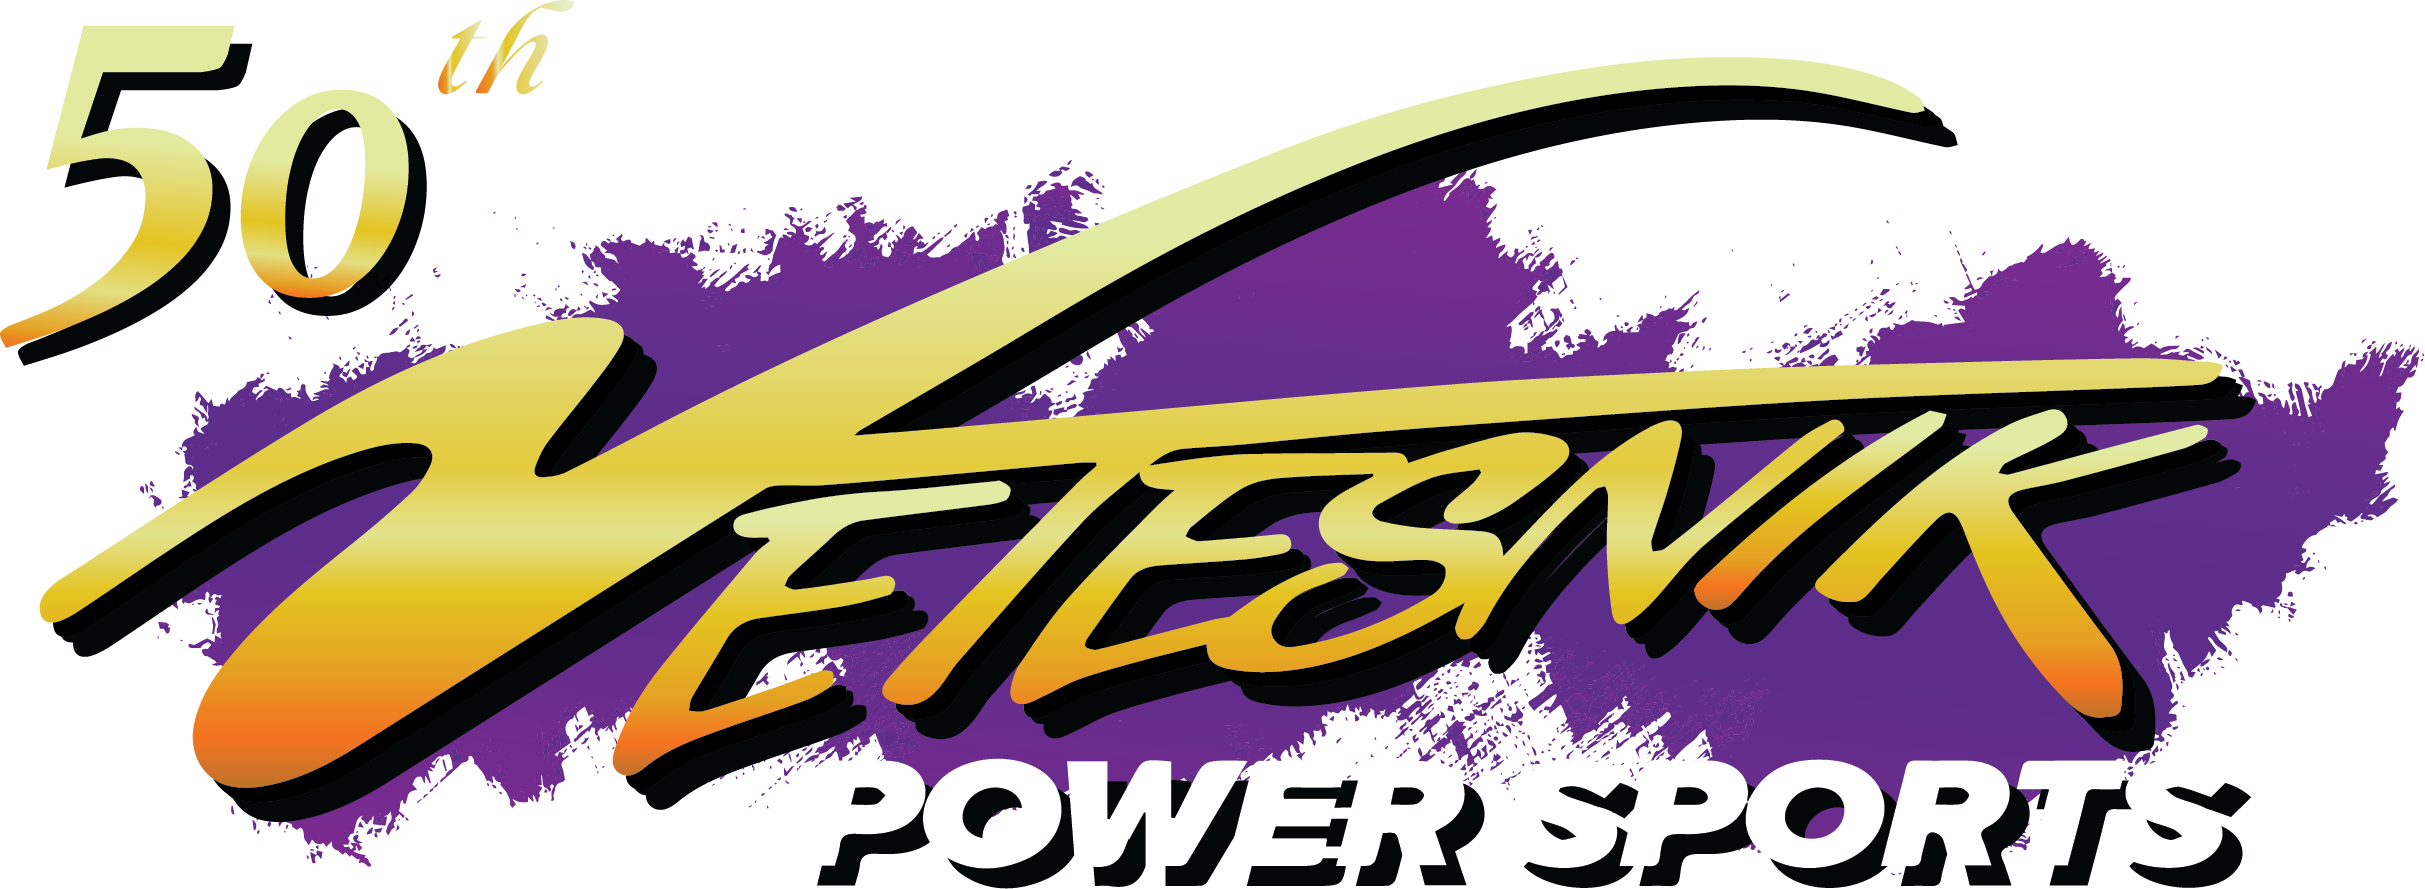 Vetesnik Power Sports proudly serves Richland Center and our neighbors in Madison, La Crosse, Dubuque, Wisconsin Dells, and Tomah